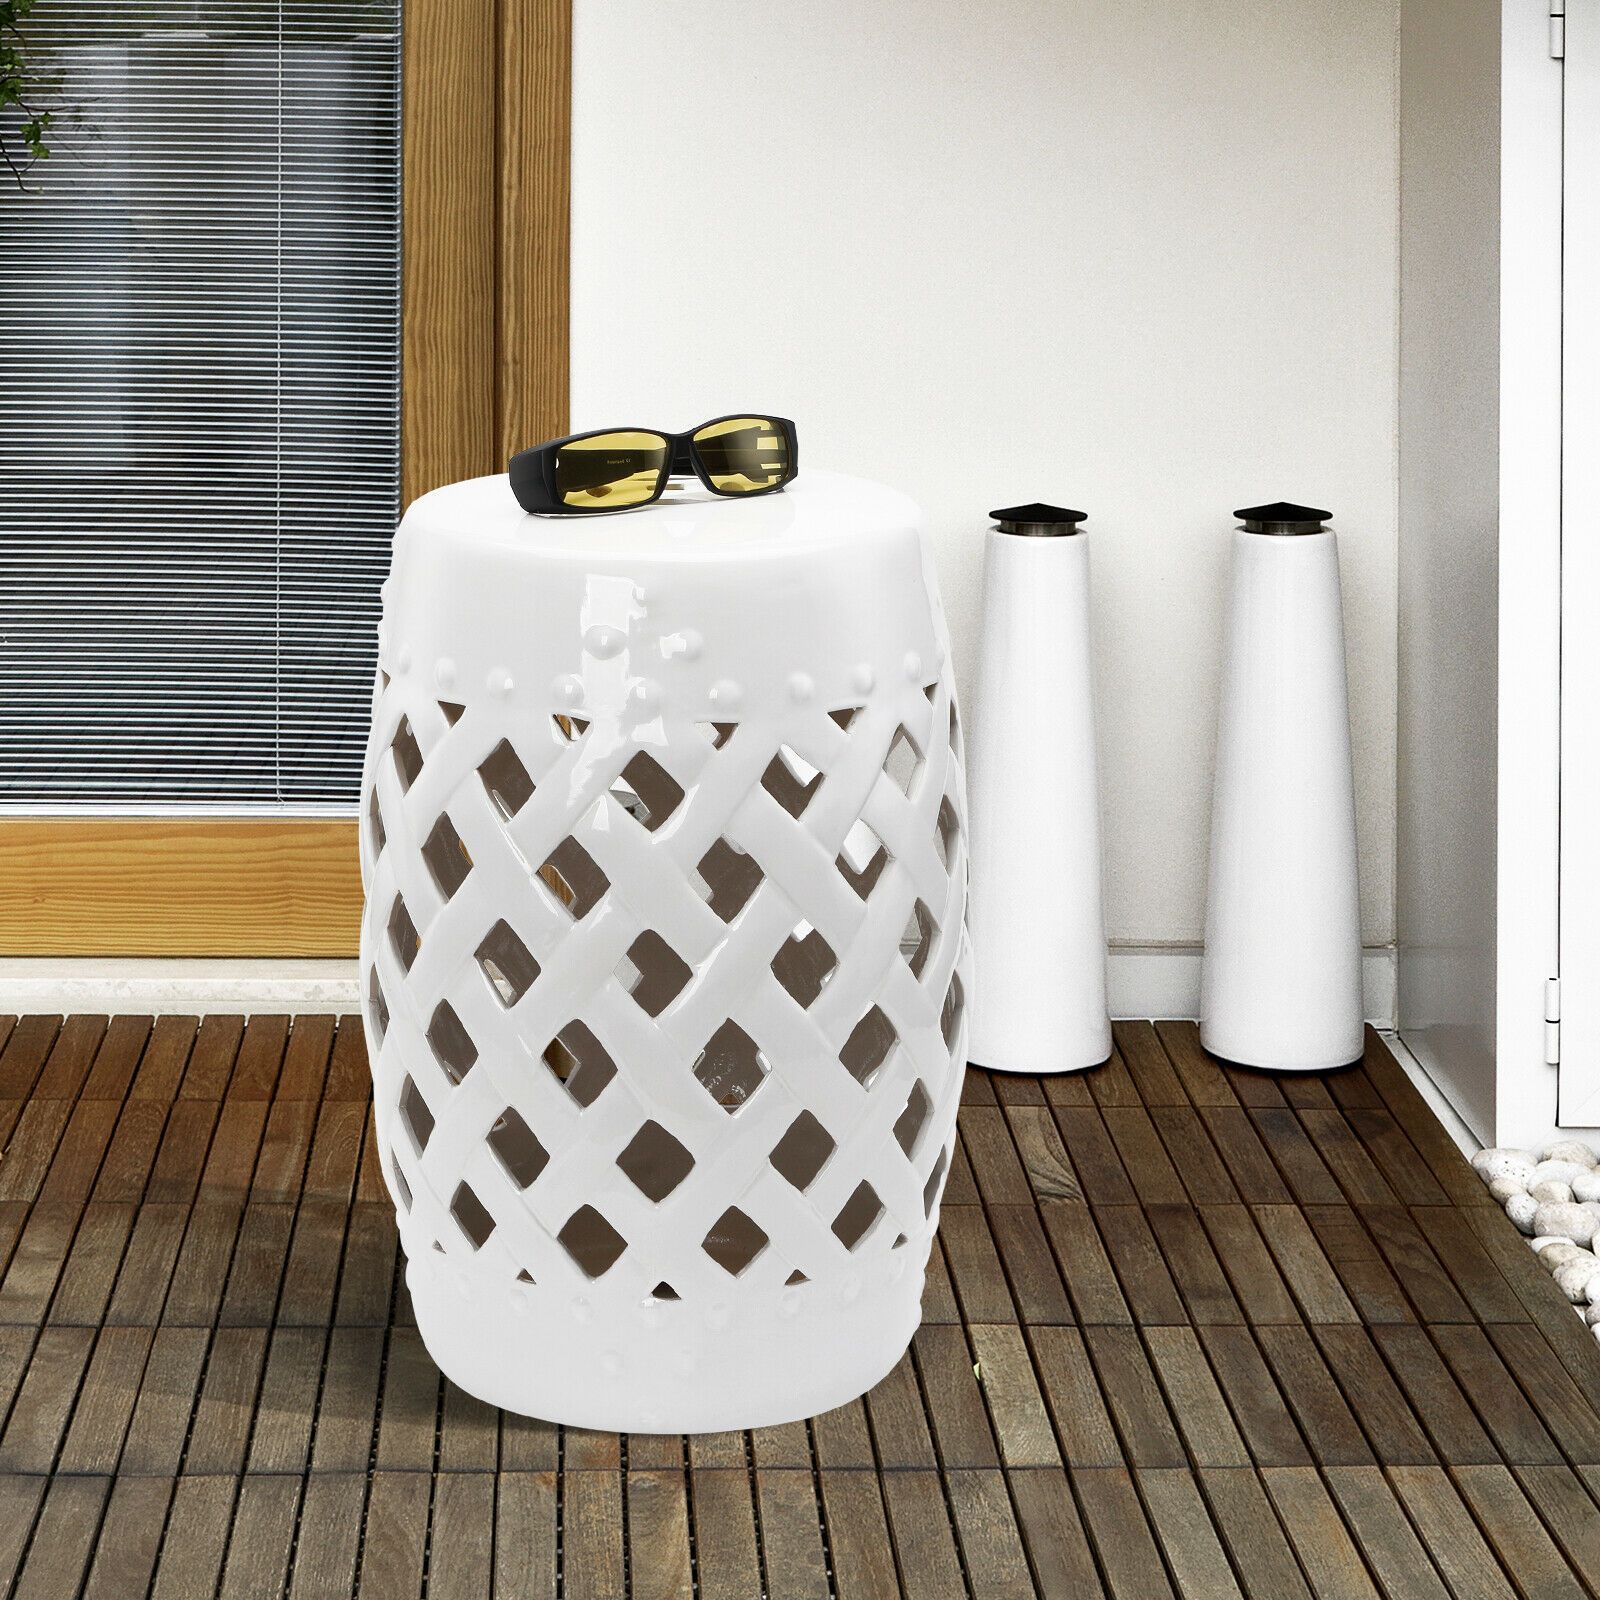 Outsunny Modern Ceramic Lattice Garden Stool Accent Table Decorative White Intended For Standwood Metal Garden Stools (View 7 of 25)